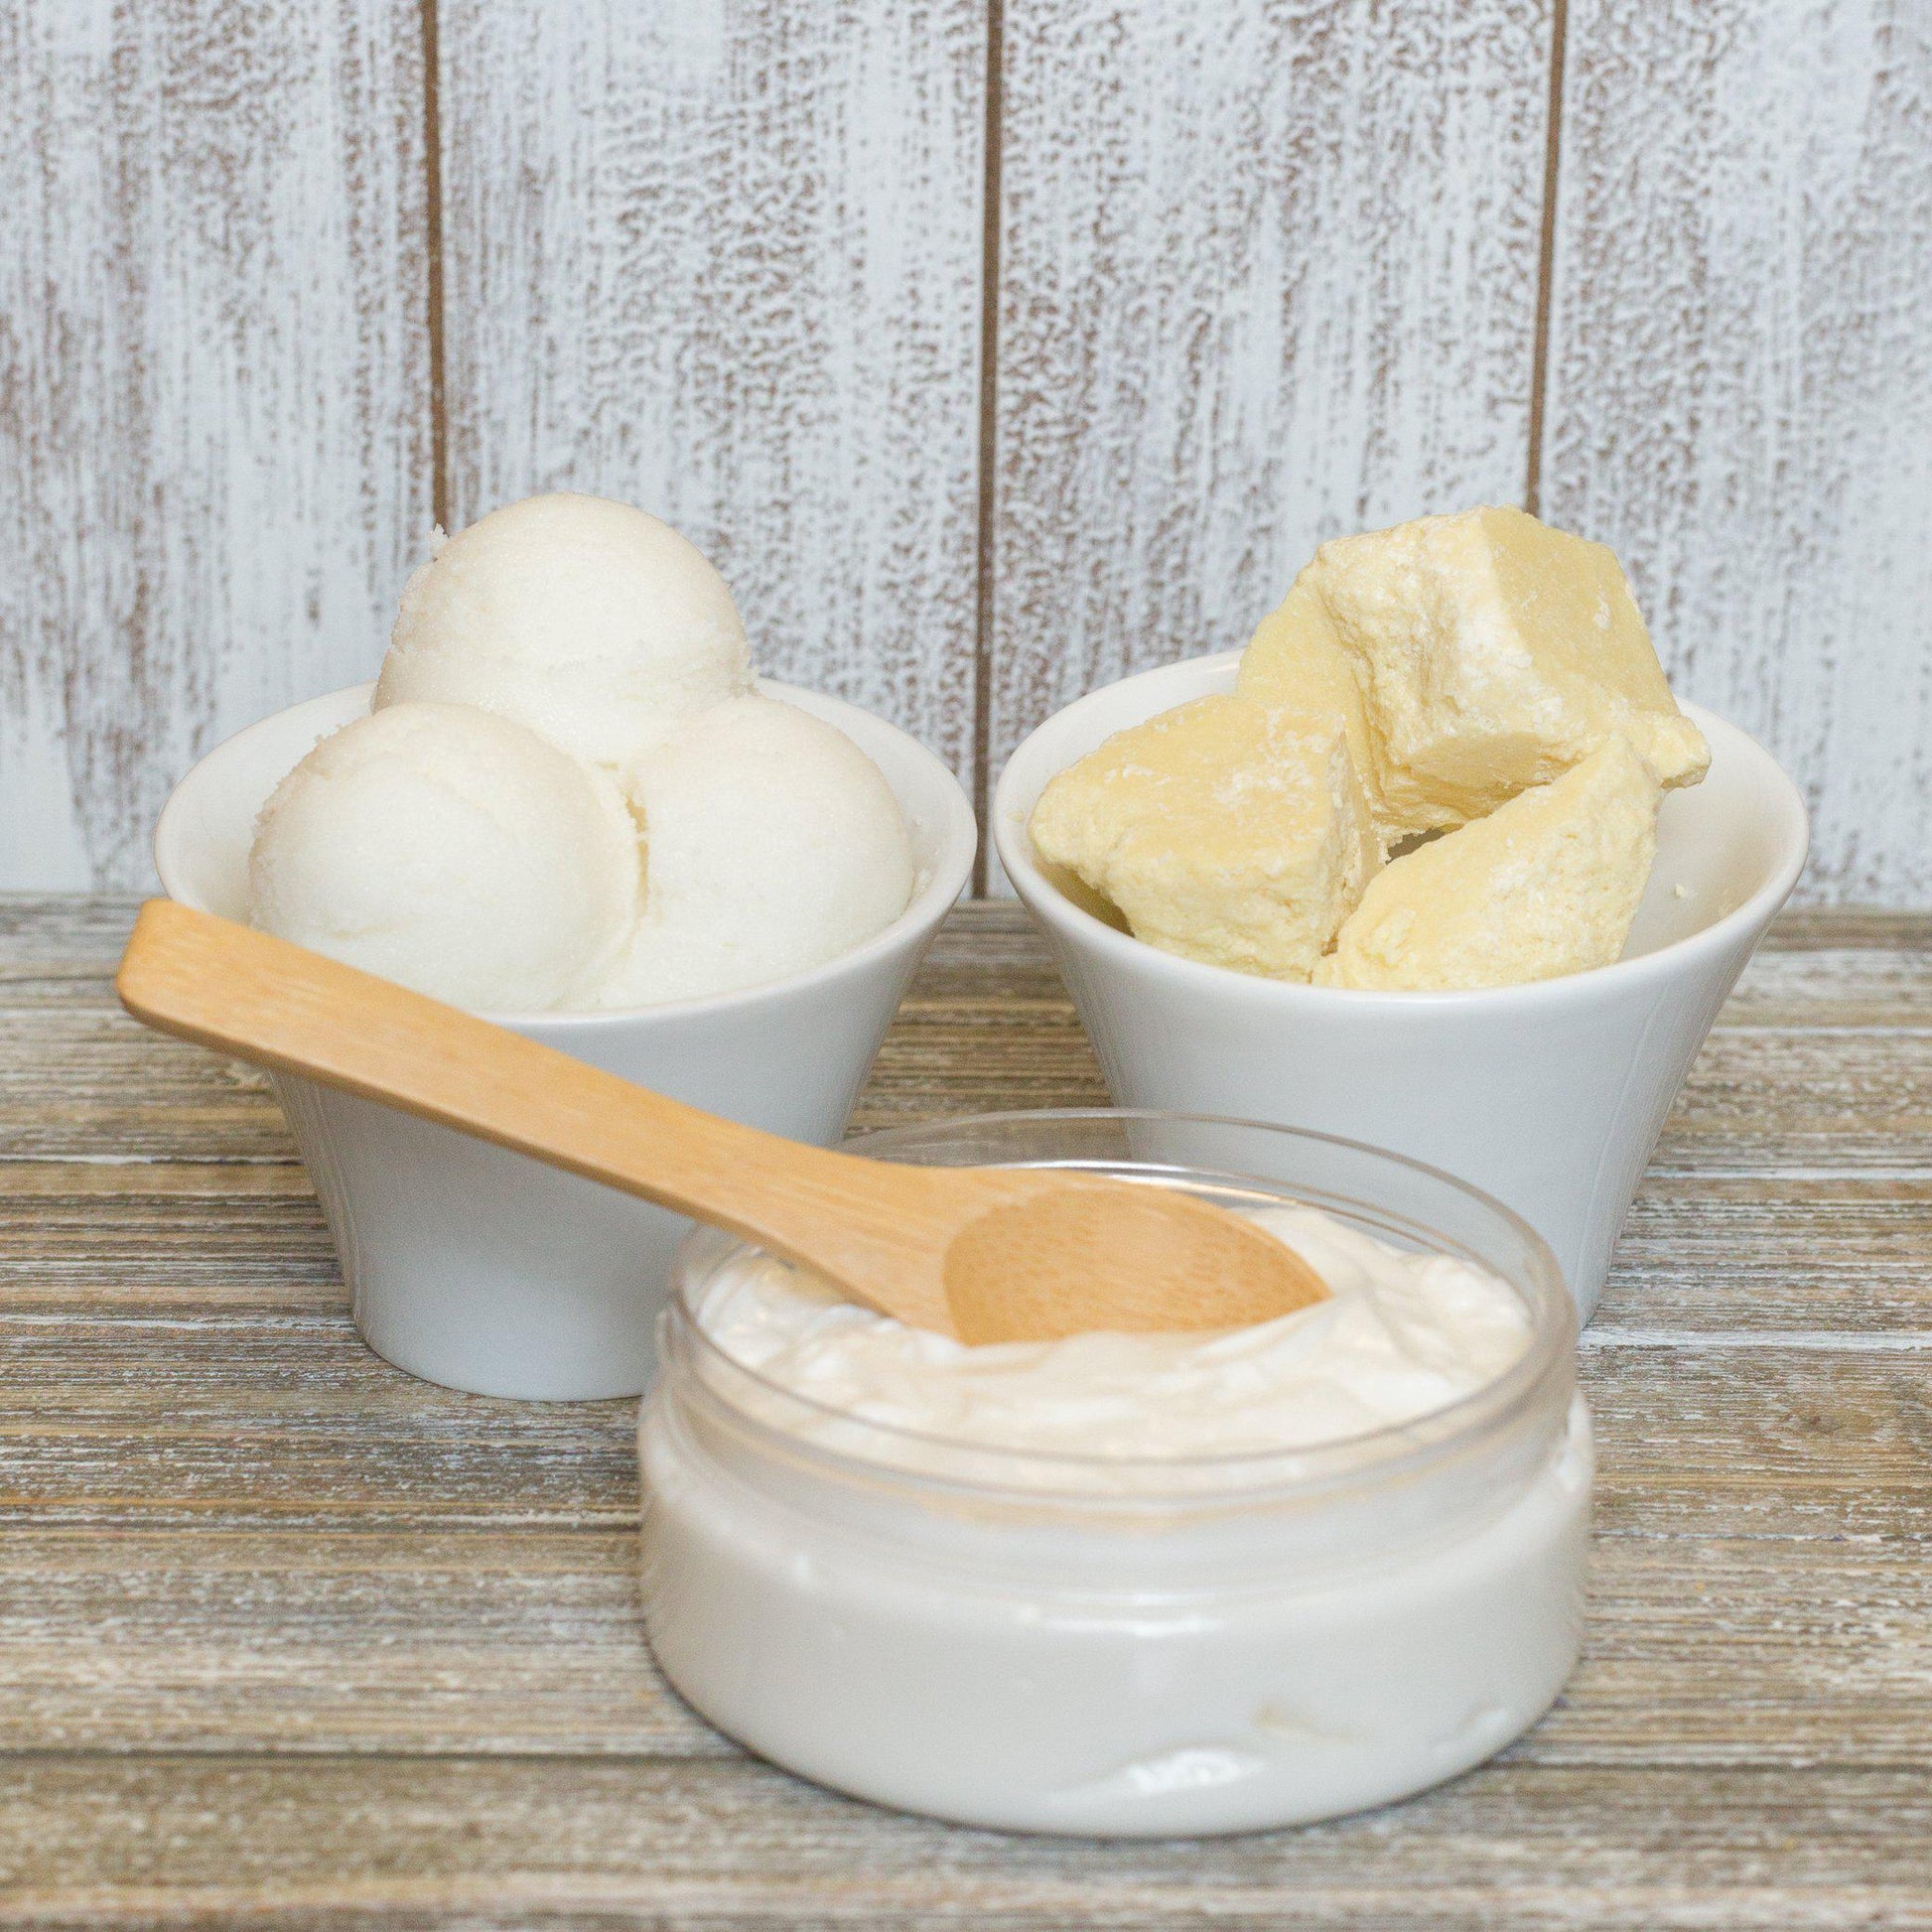 Natural Body Butter - Choice of Scent, 5oz-Body Butter-Perfectly Natural Soap